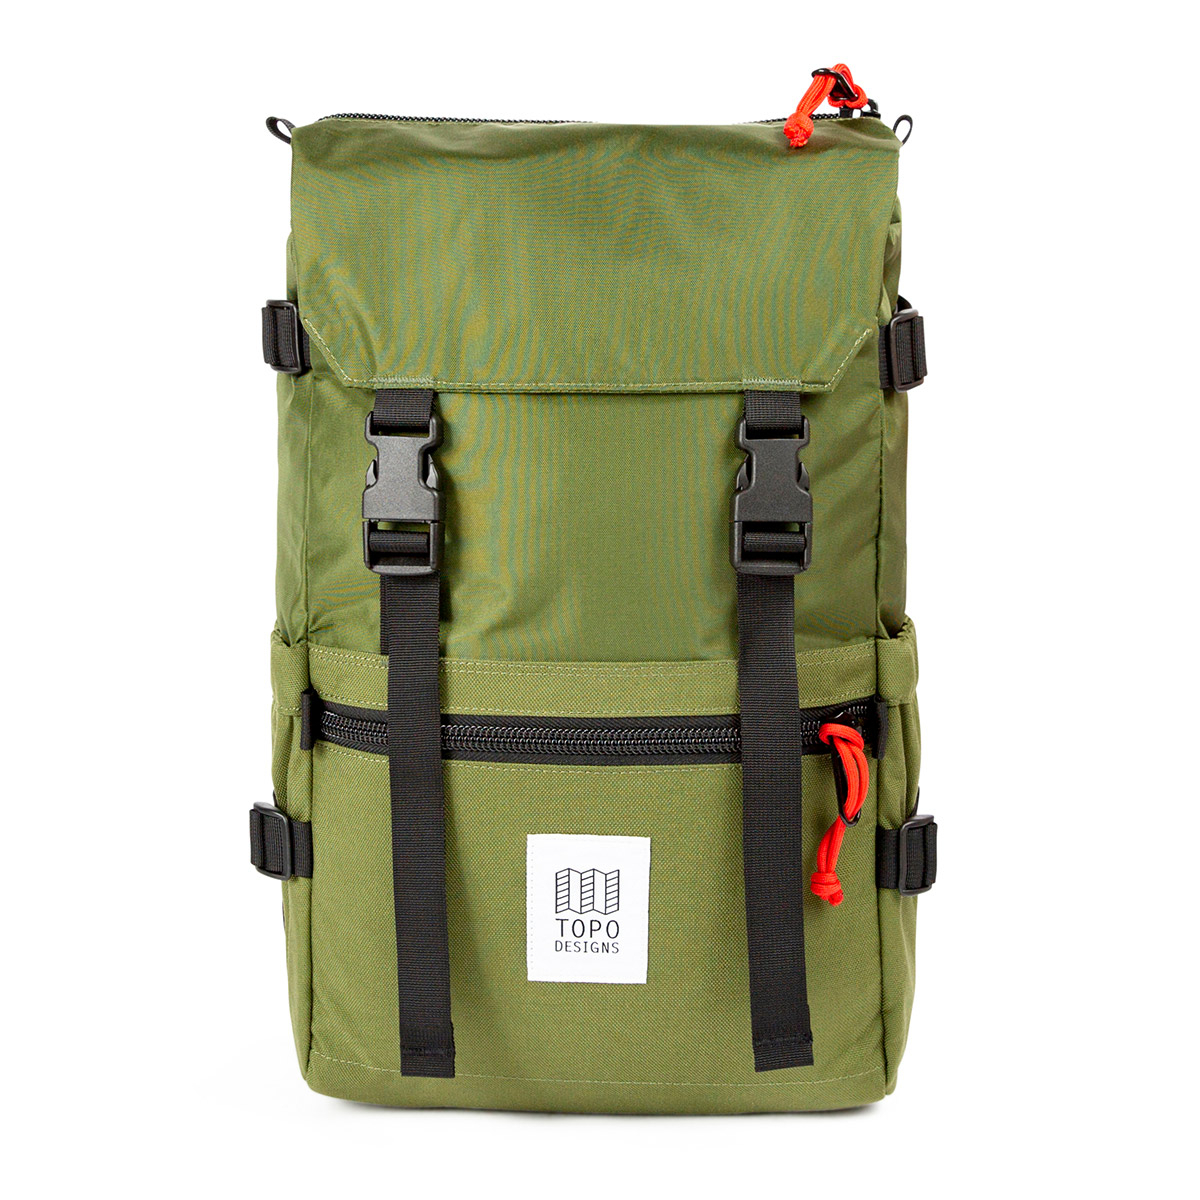 Topo Designs Rover Pack Classic Olive, backpack with timeless styling ...